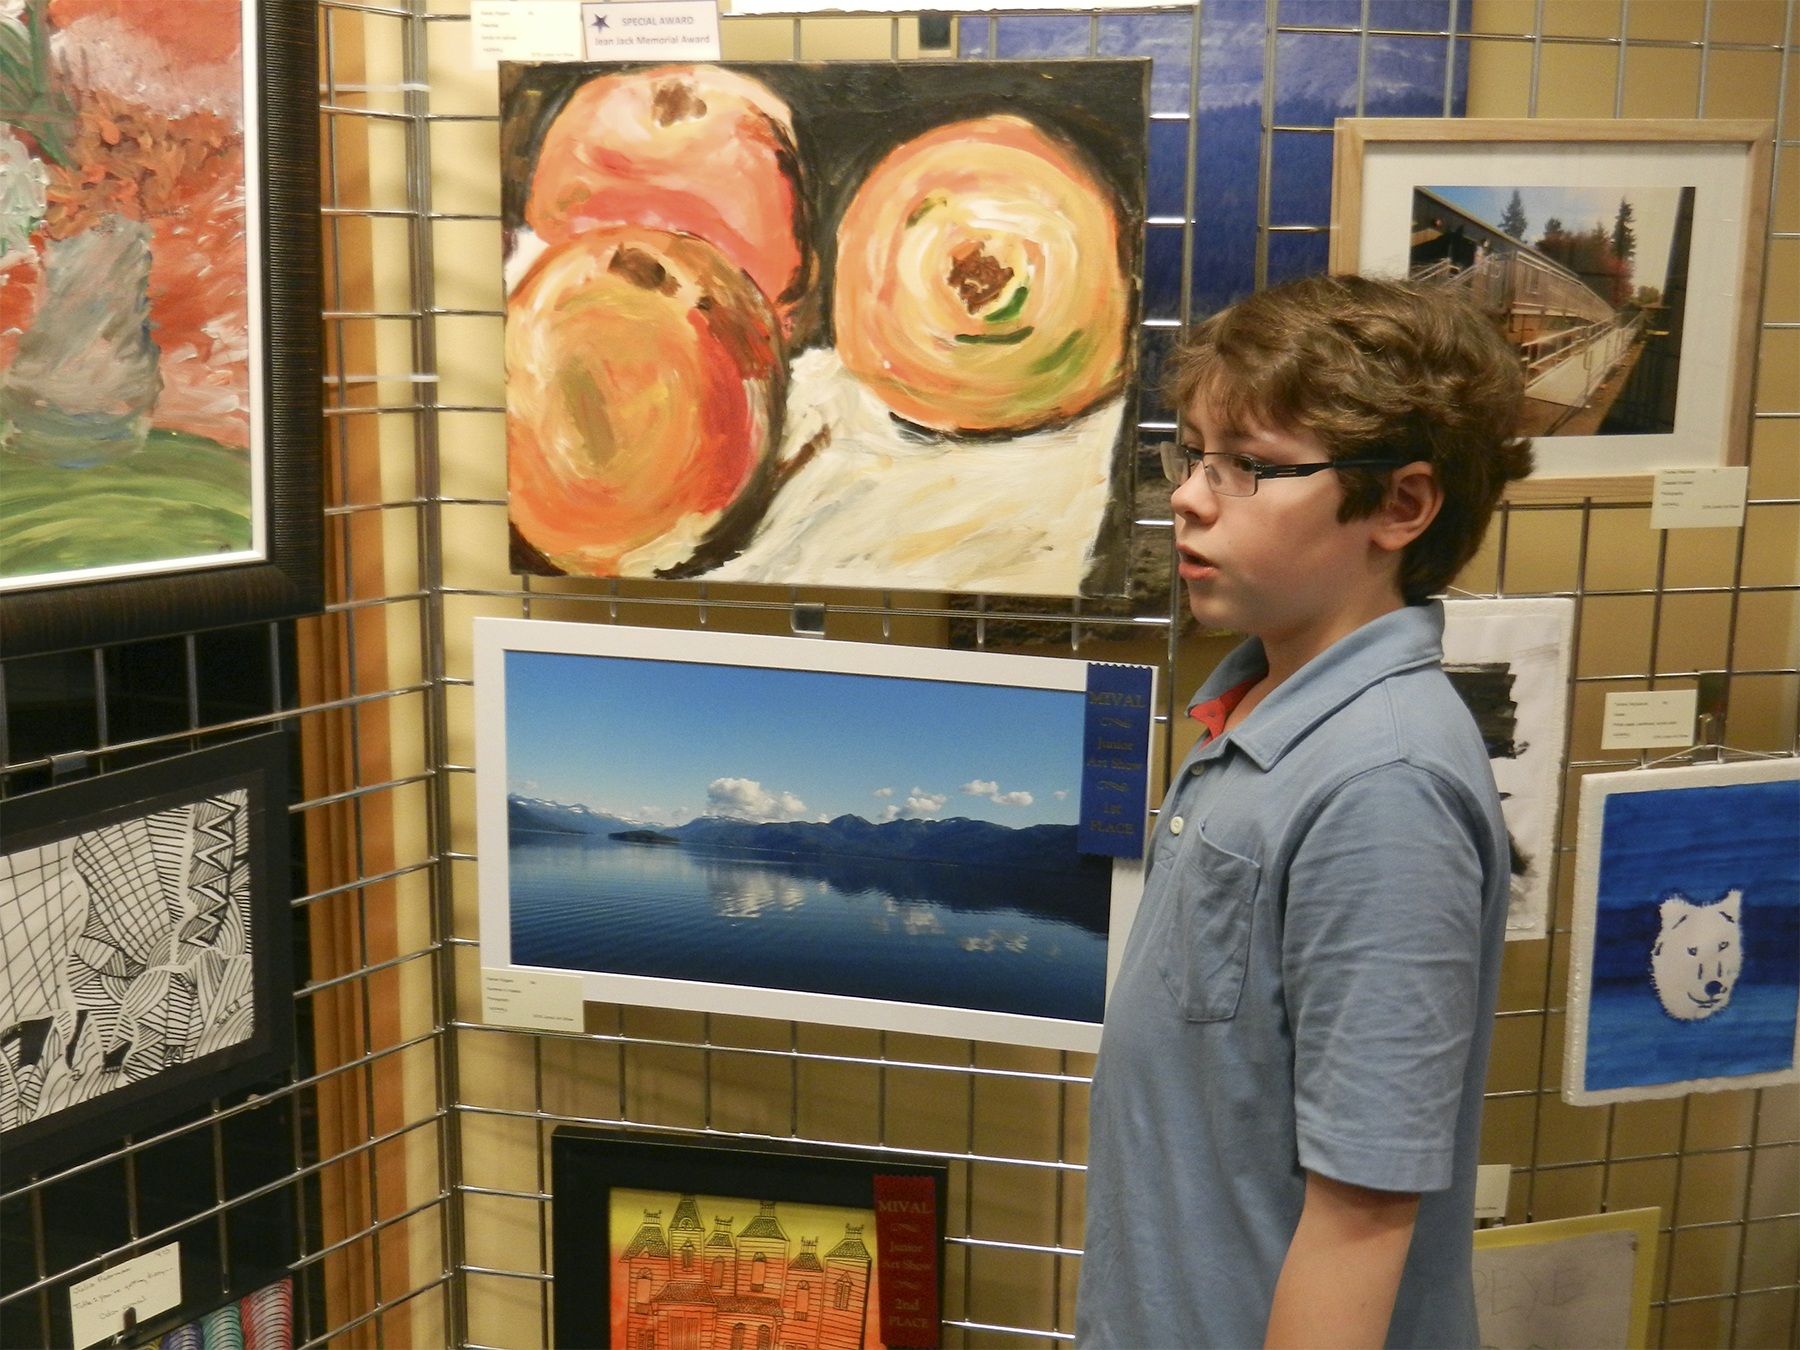 Fifth grader Kieran Rogers poses with his “Summer in Alaska” photo and his Jean Jack Award winning “Peaches